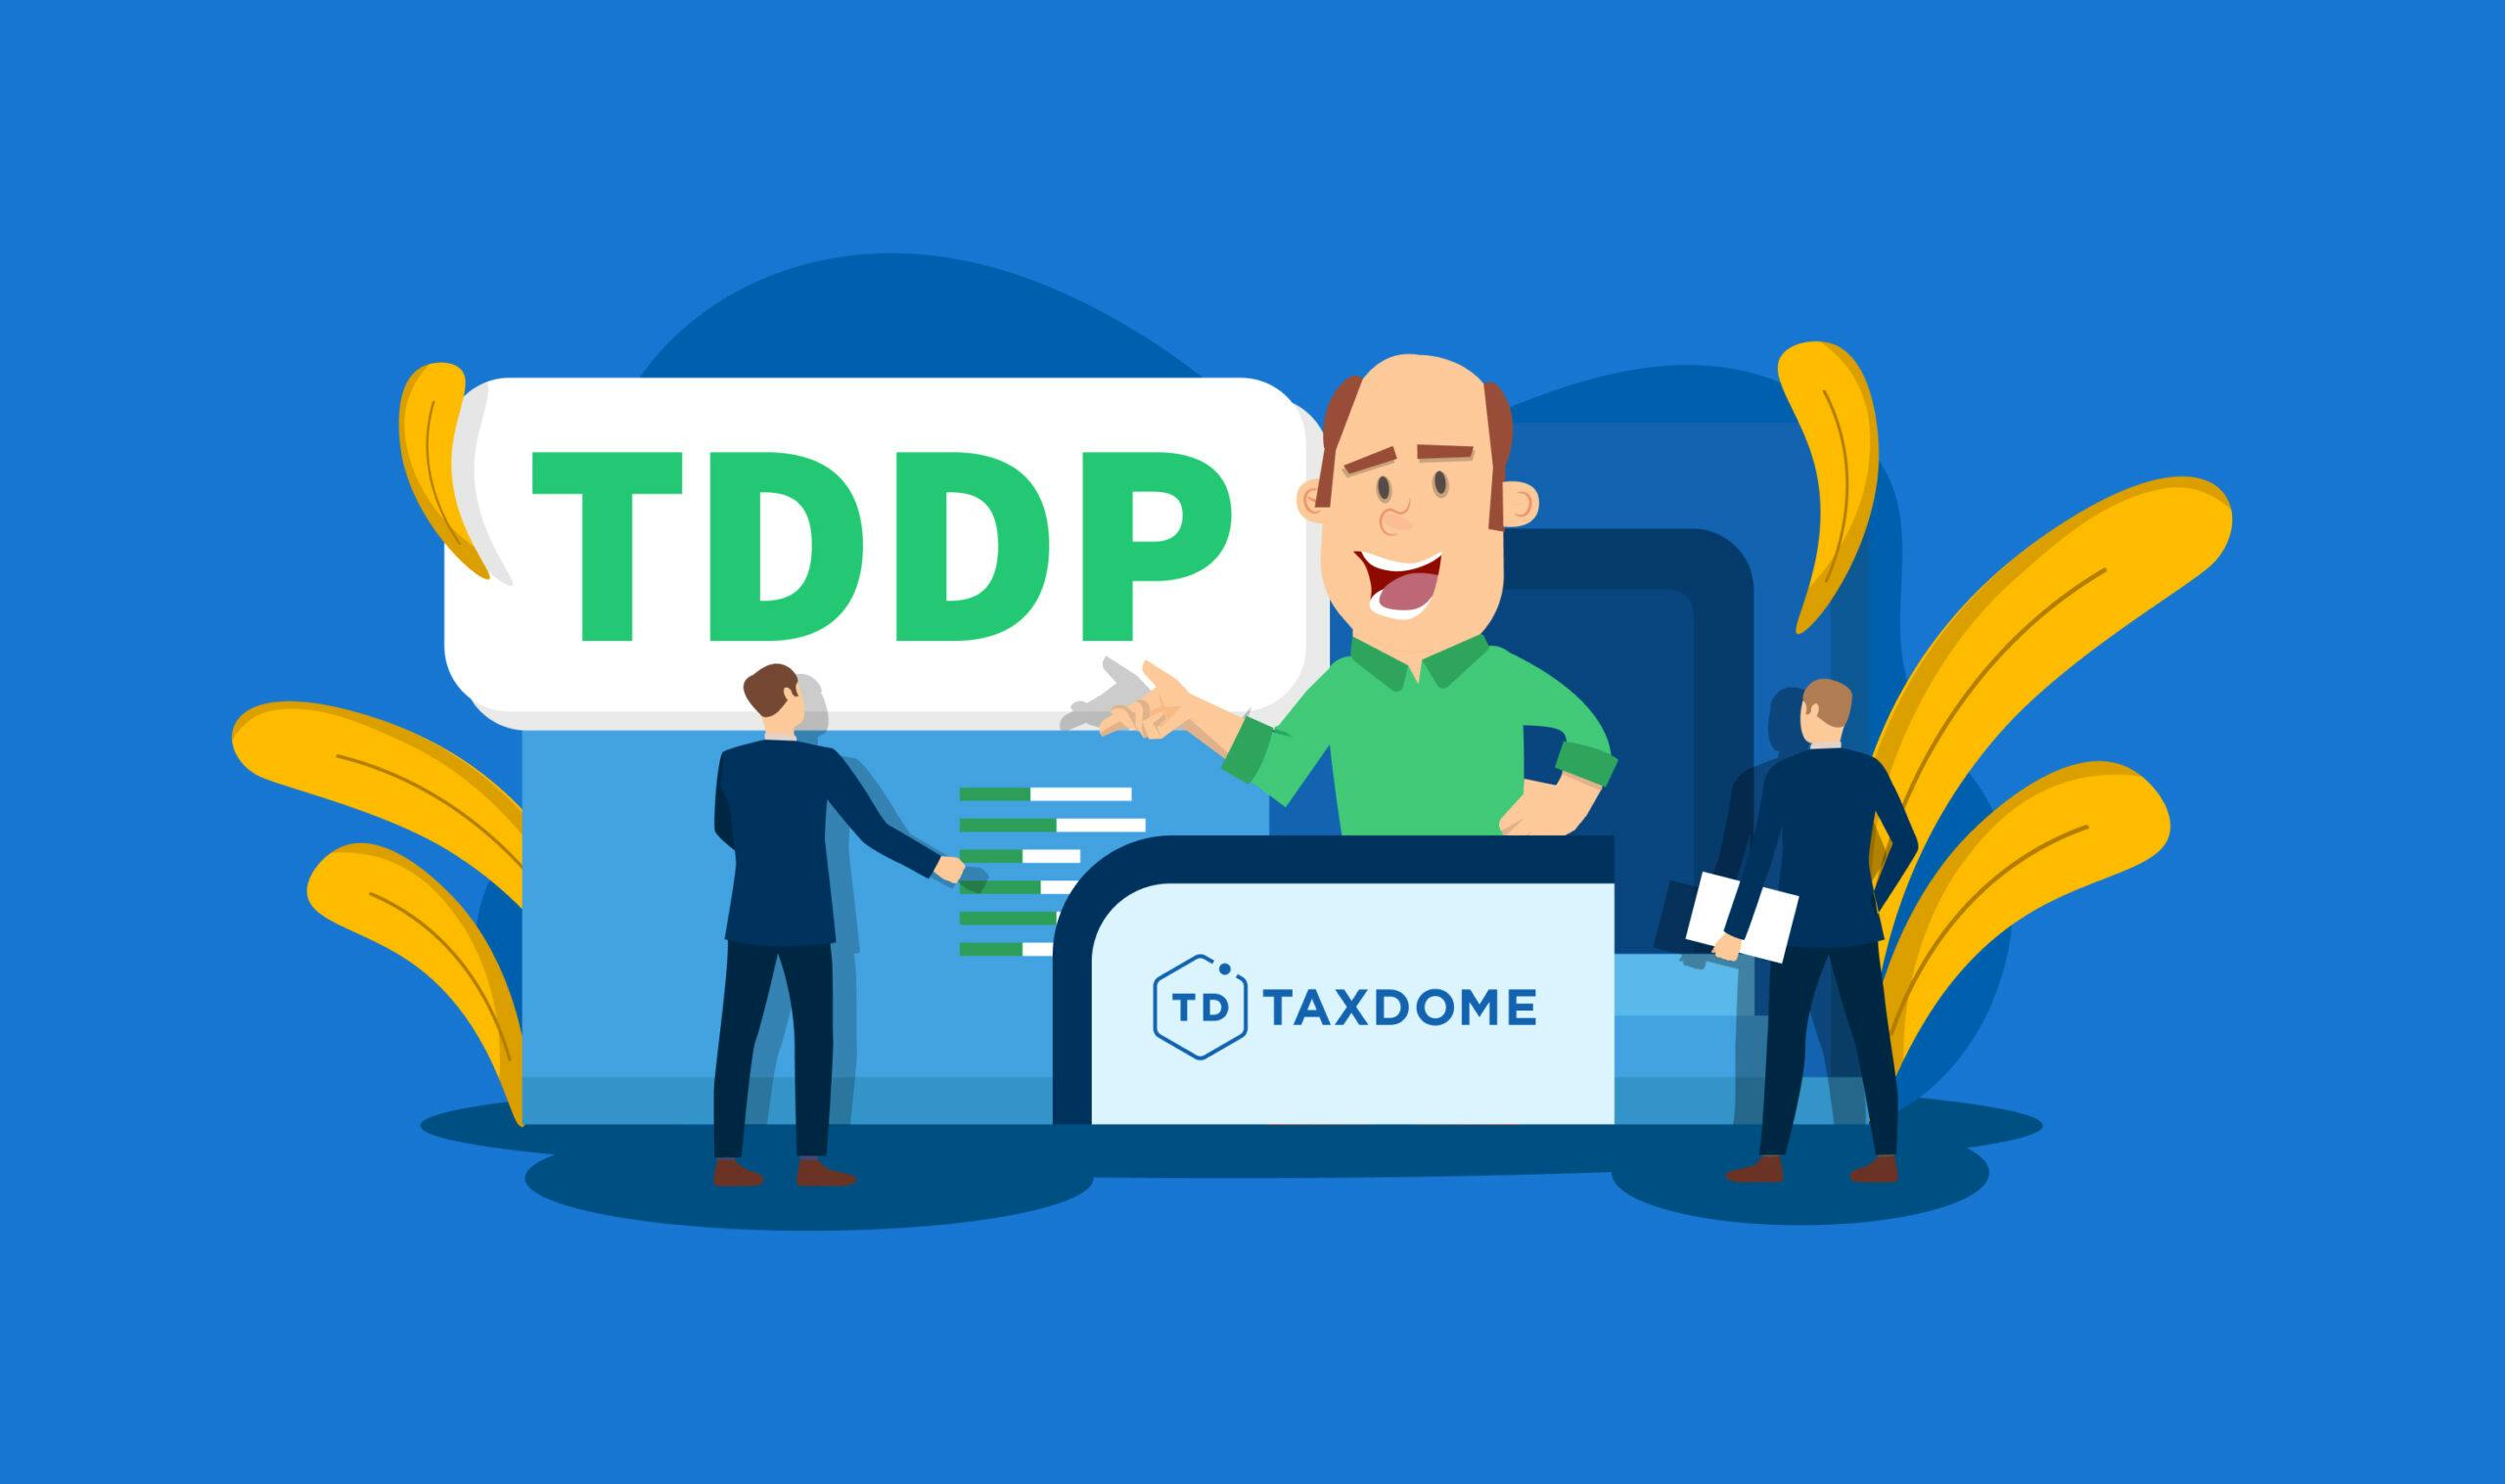 TaxDome participated in the VIII TDDP Congress